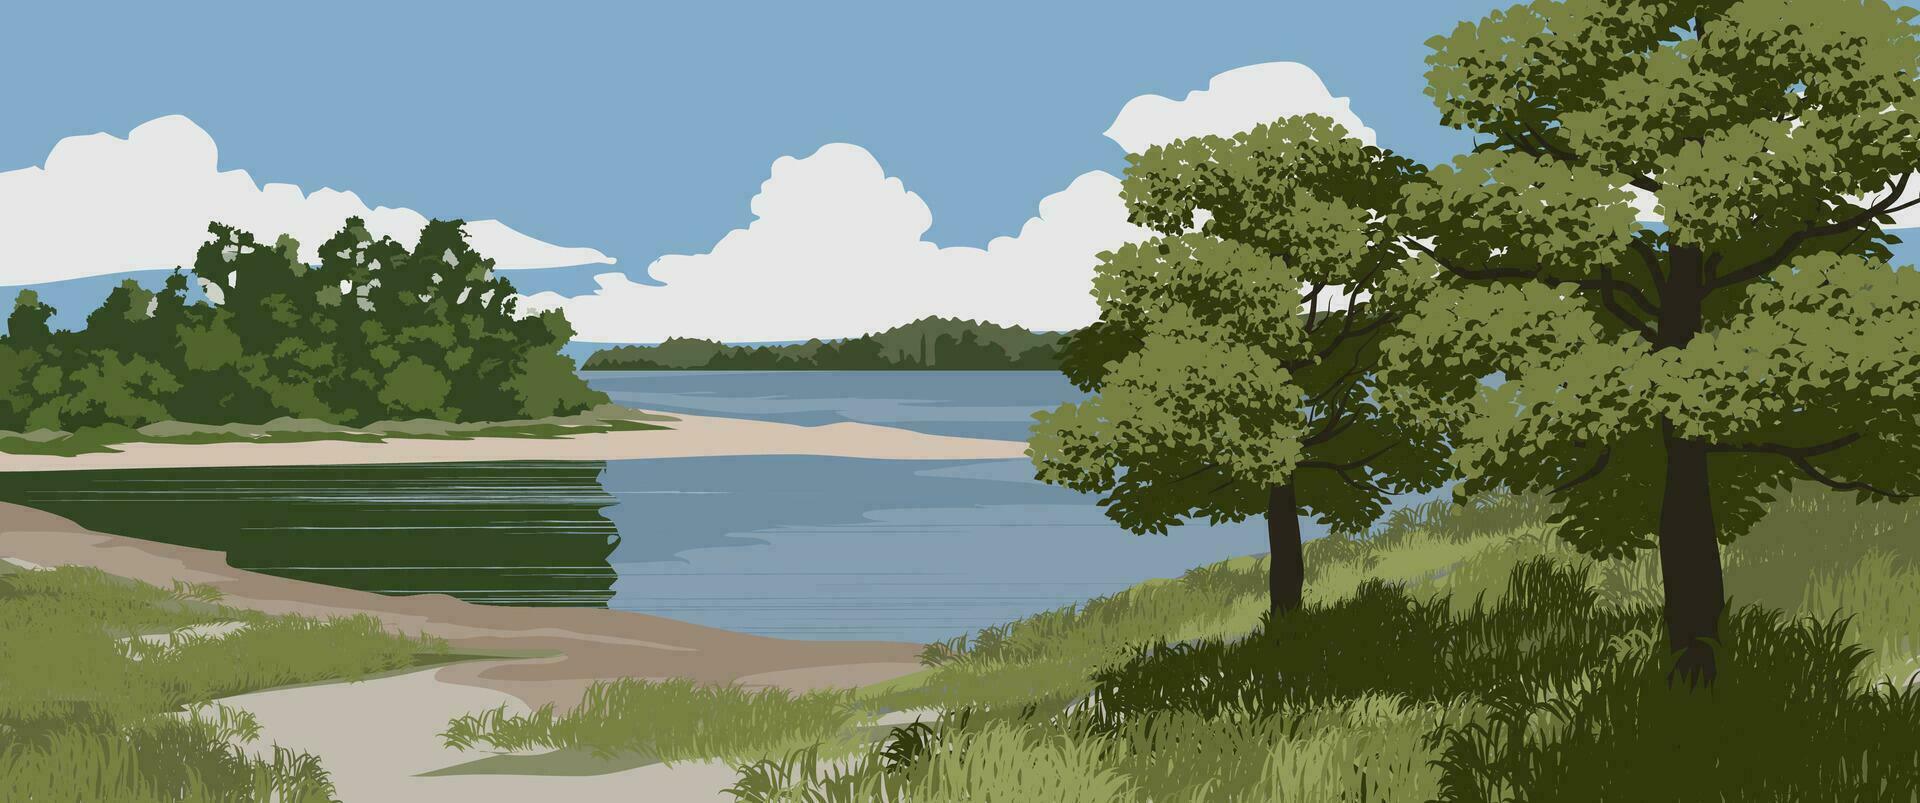 Lake at sunny day. Vector nature landscape